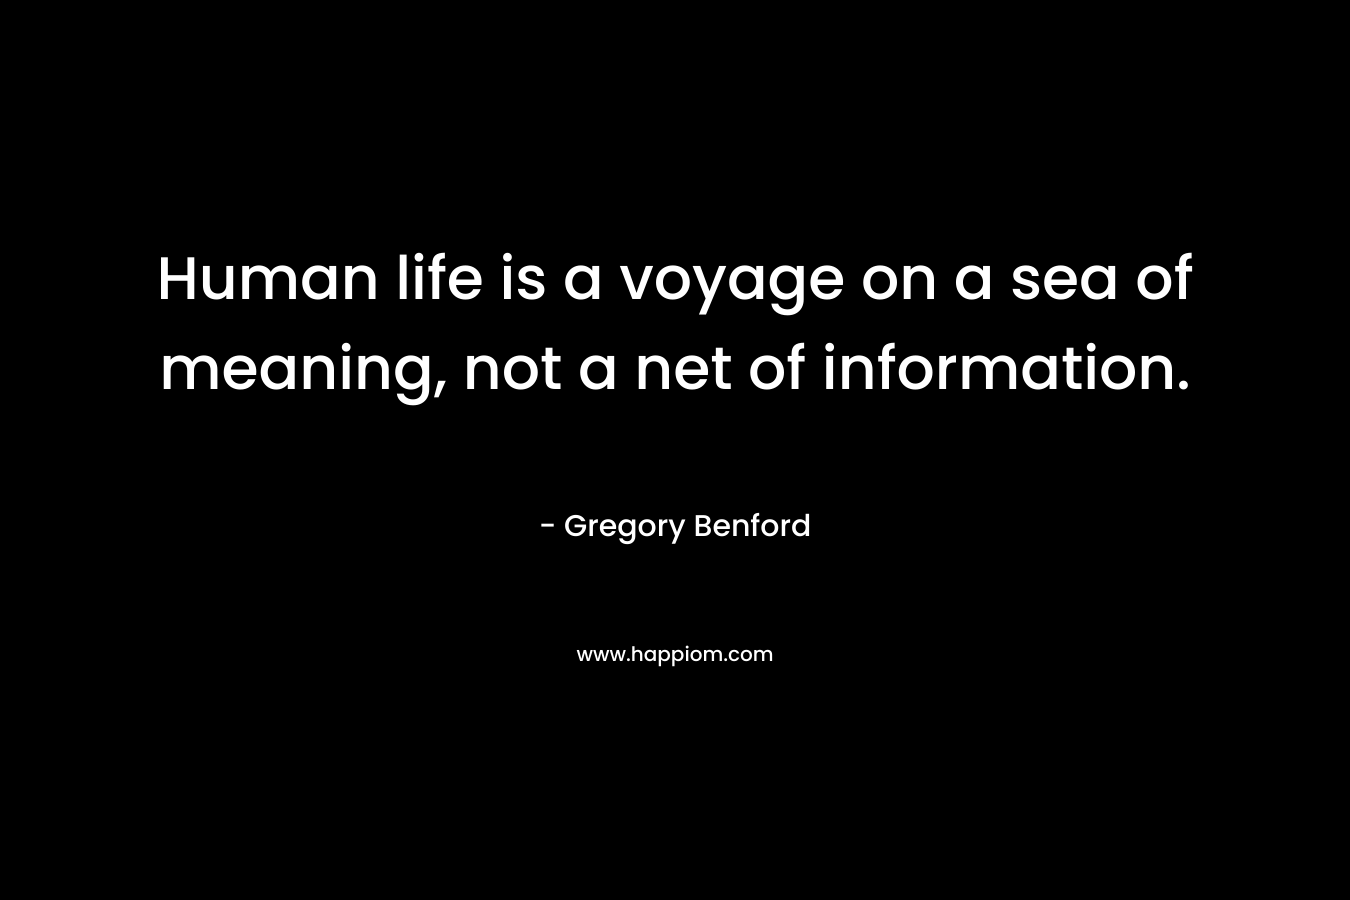 Human life is a voyage on a sea of meaning, not a net of information.